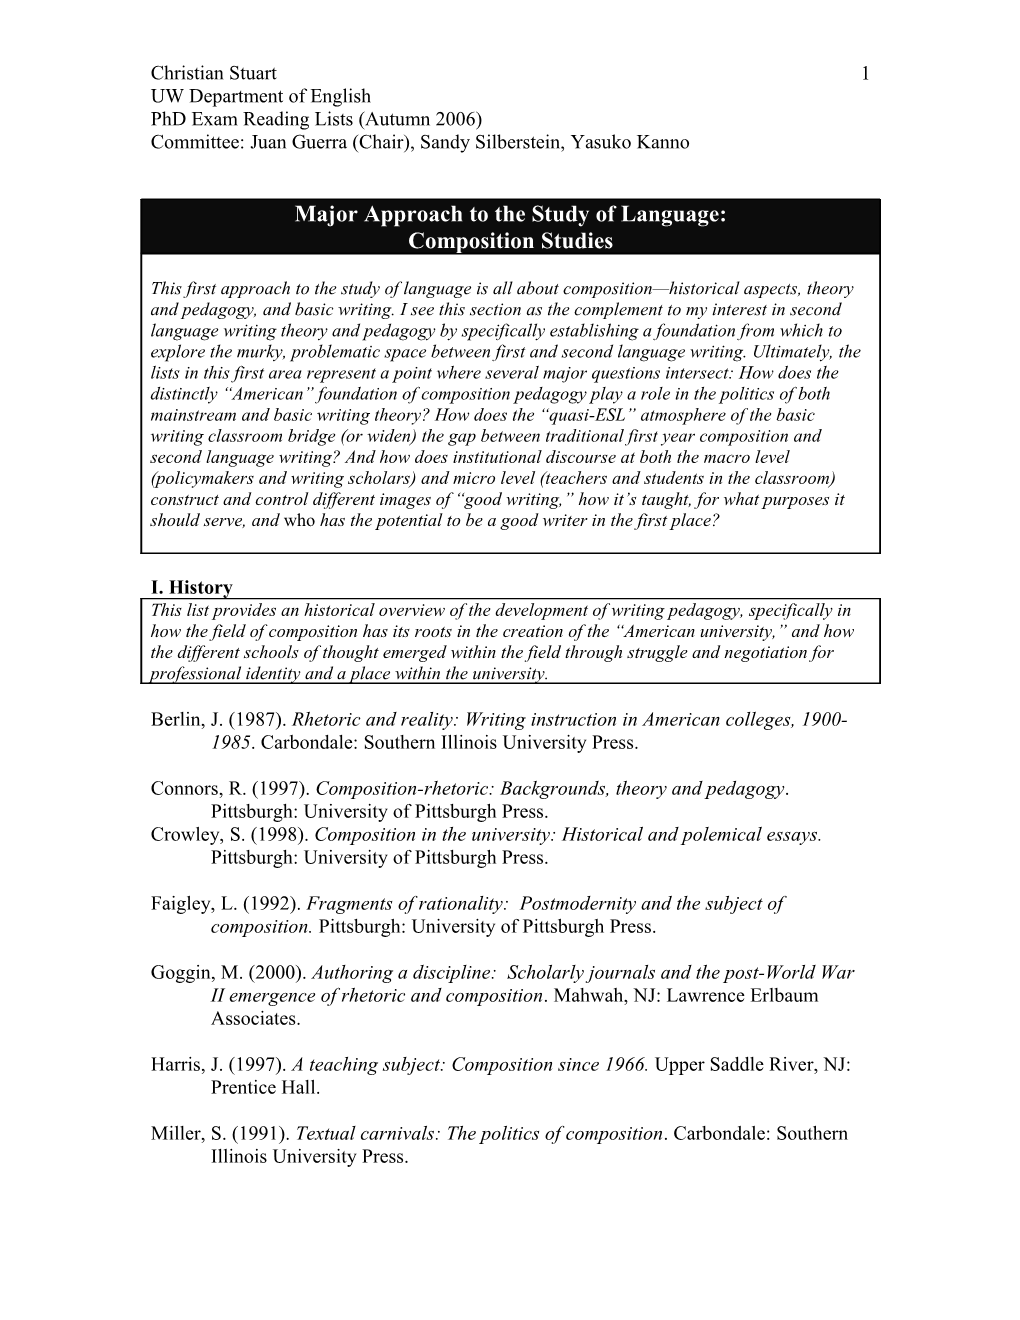 First Major Approach to the Study of Language: Composition Studies